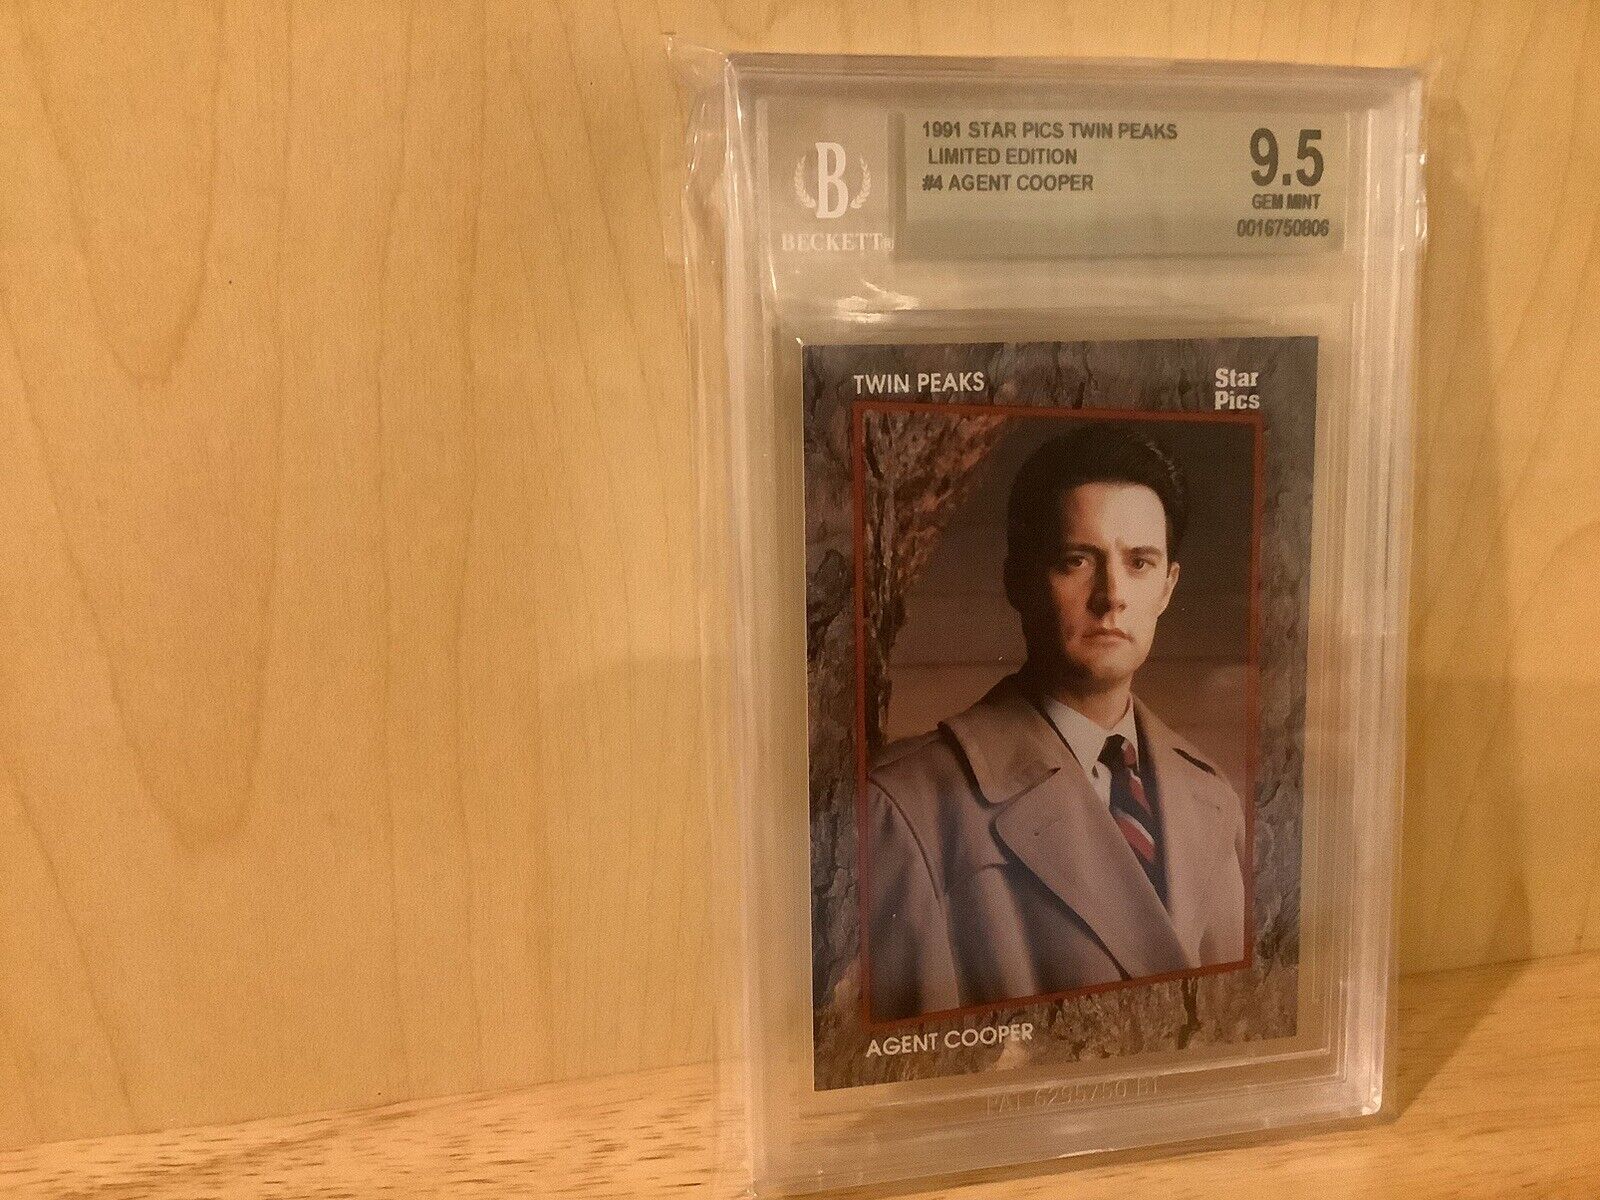 1991 Star Pics Twin Peaks Limited Edition 4 Agent Cooper 9.5 